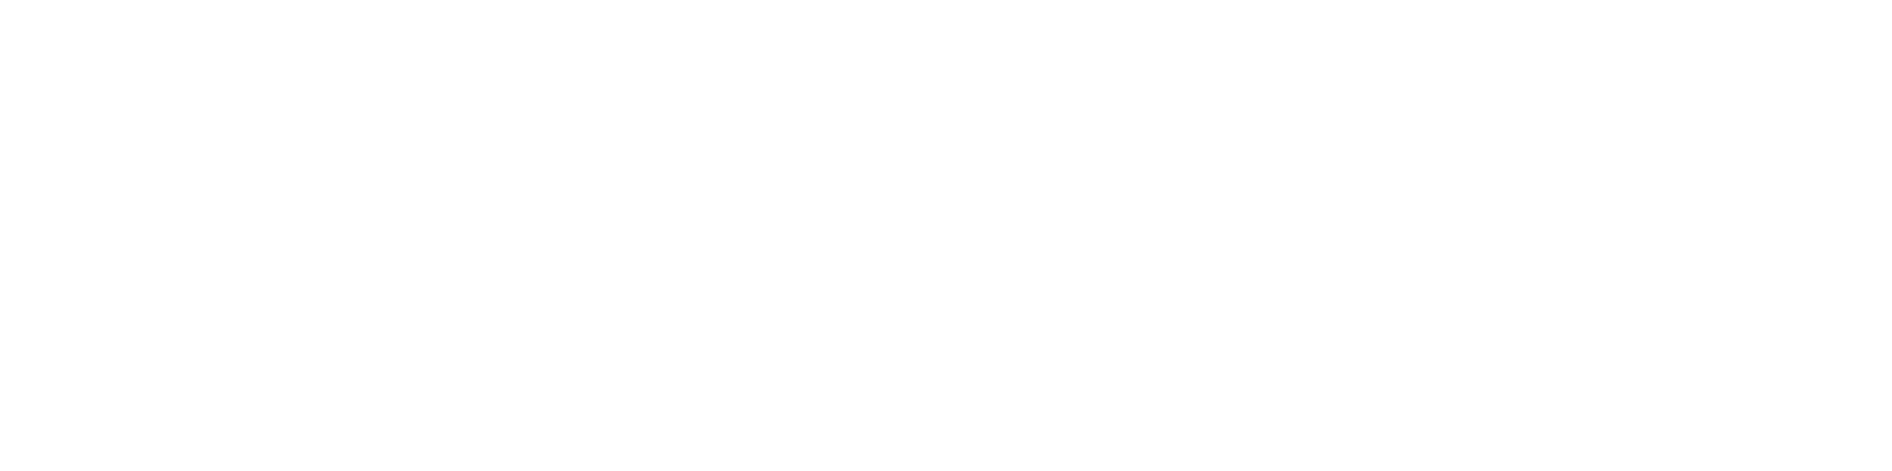 sap business one support